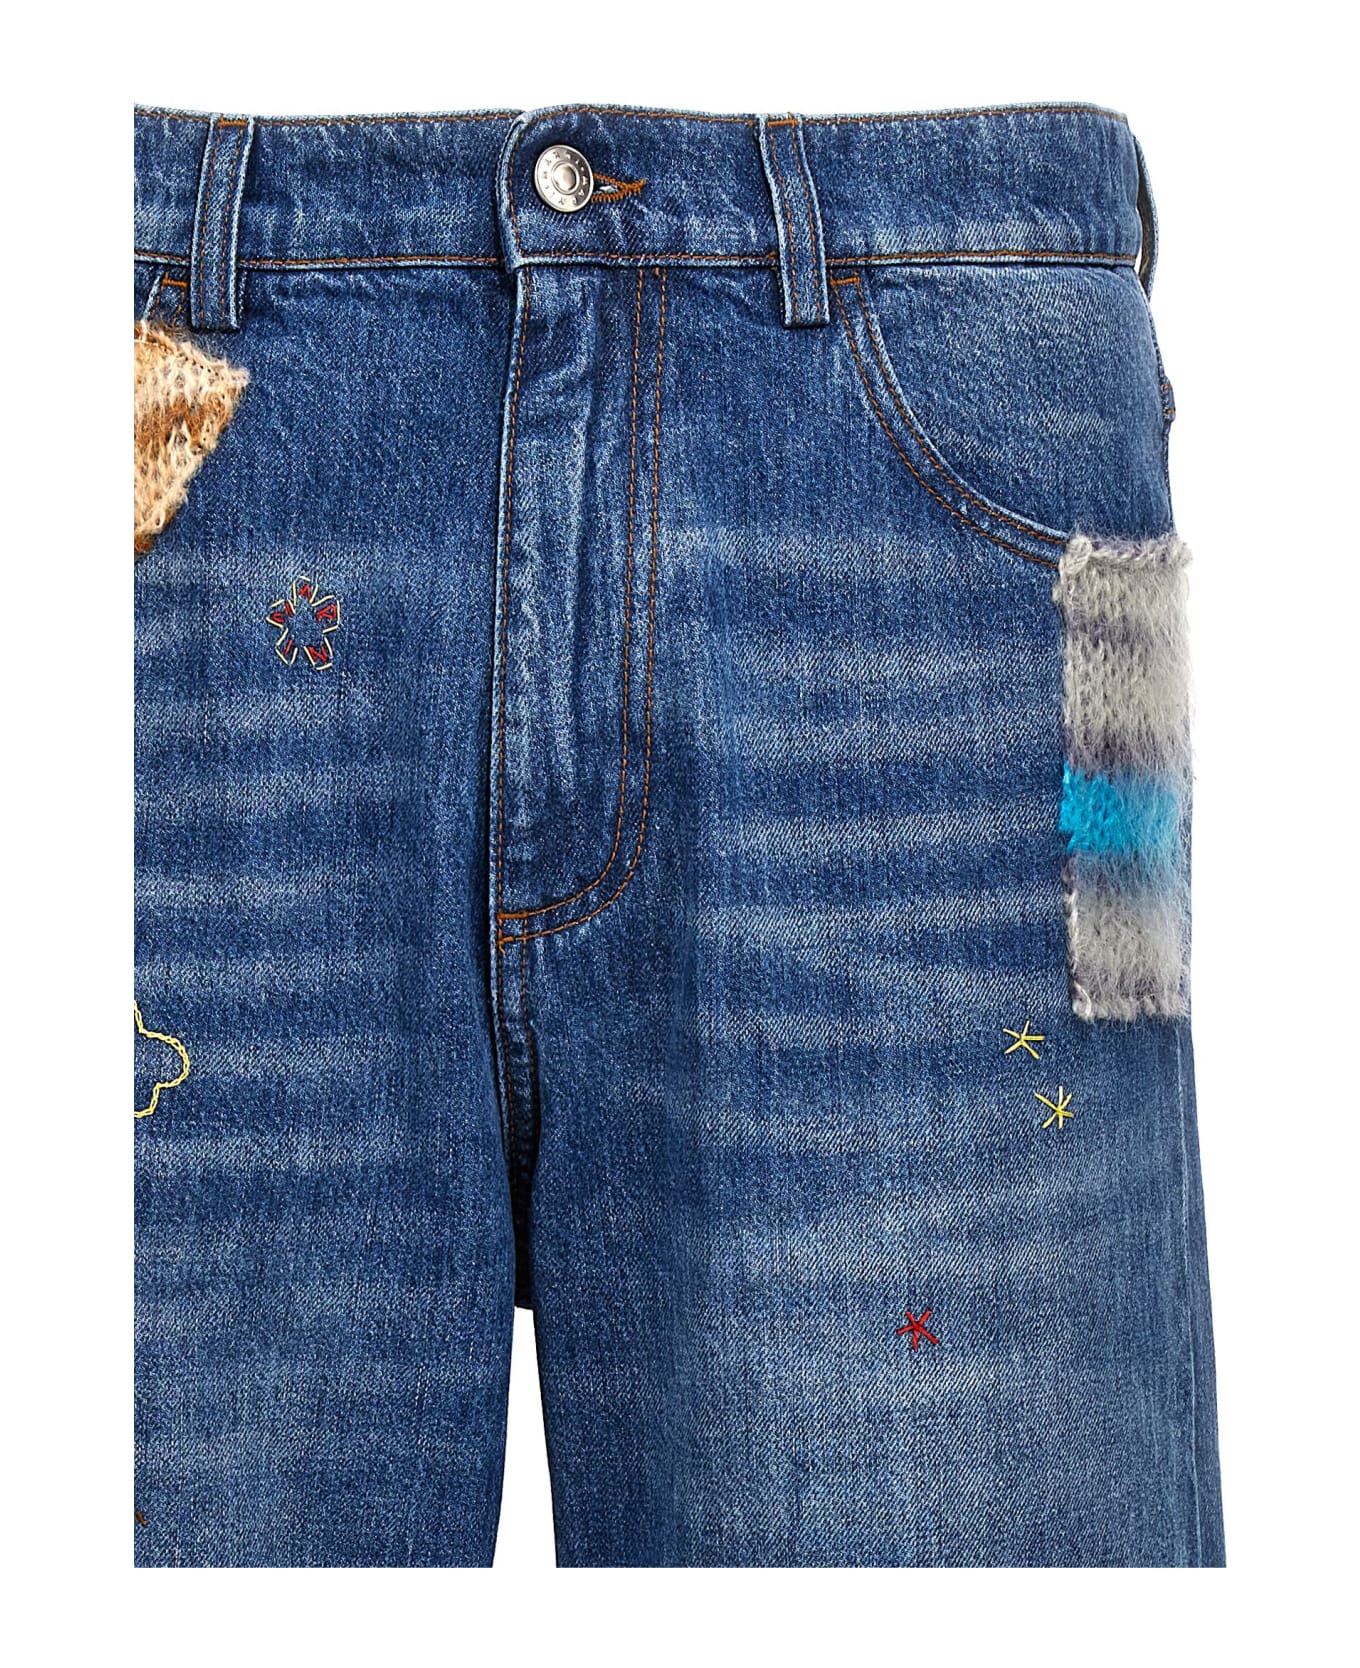 Marni Embroidery Jeans And Patches - Denim